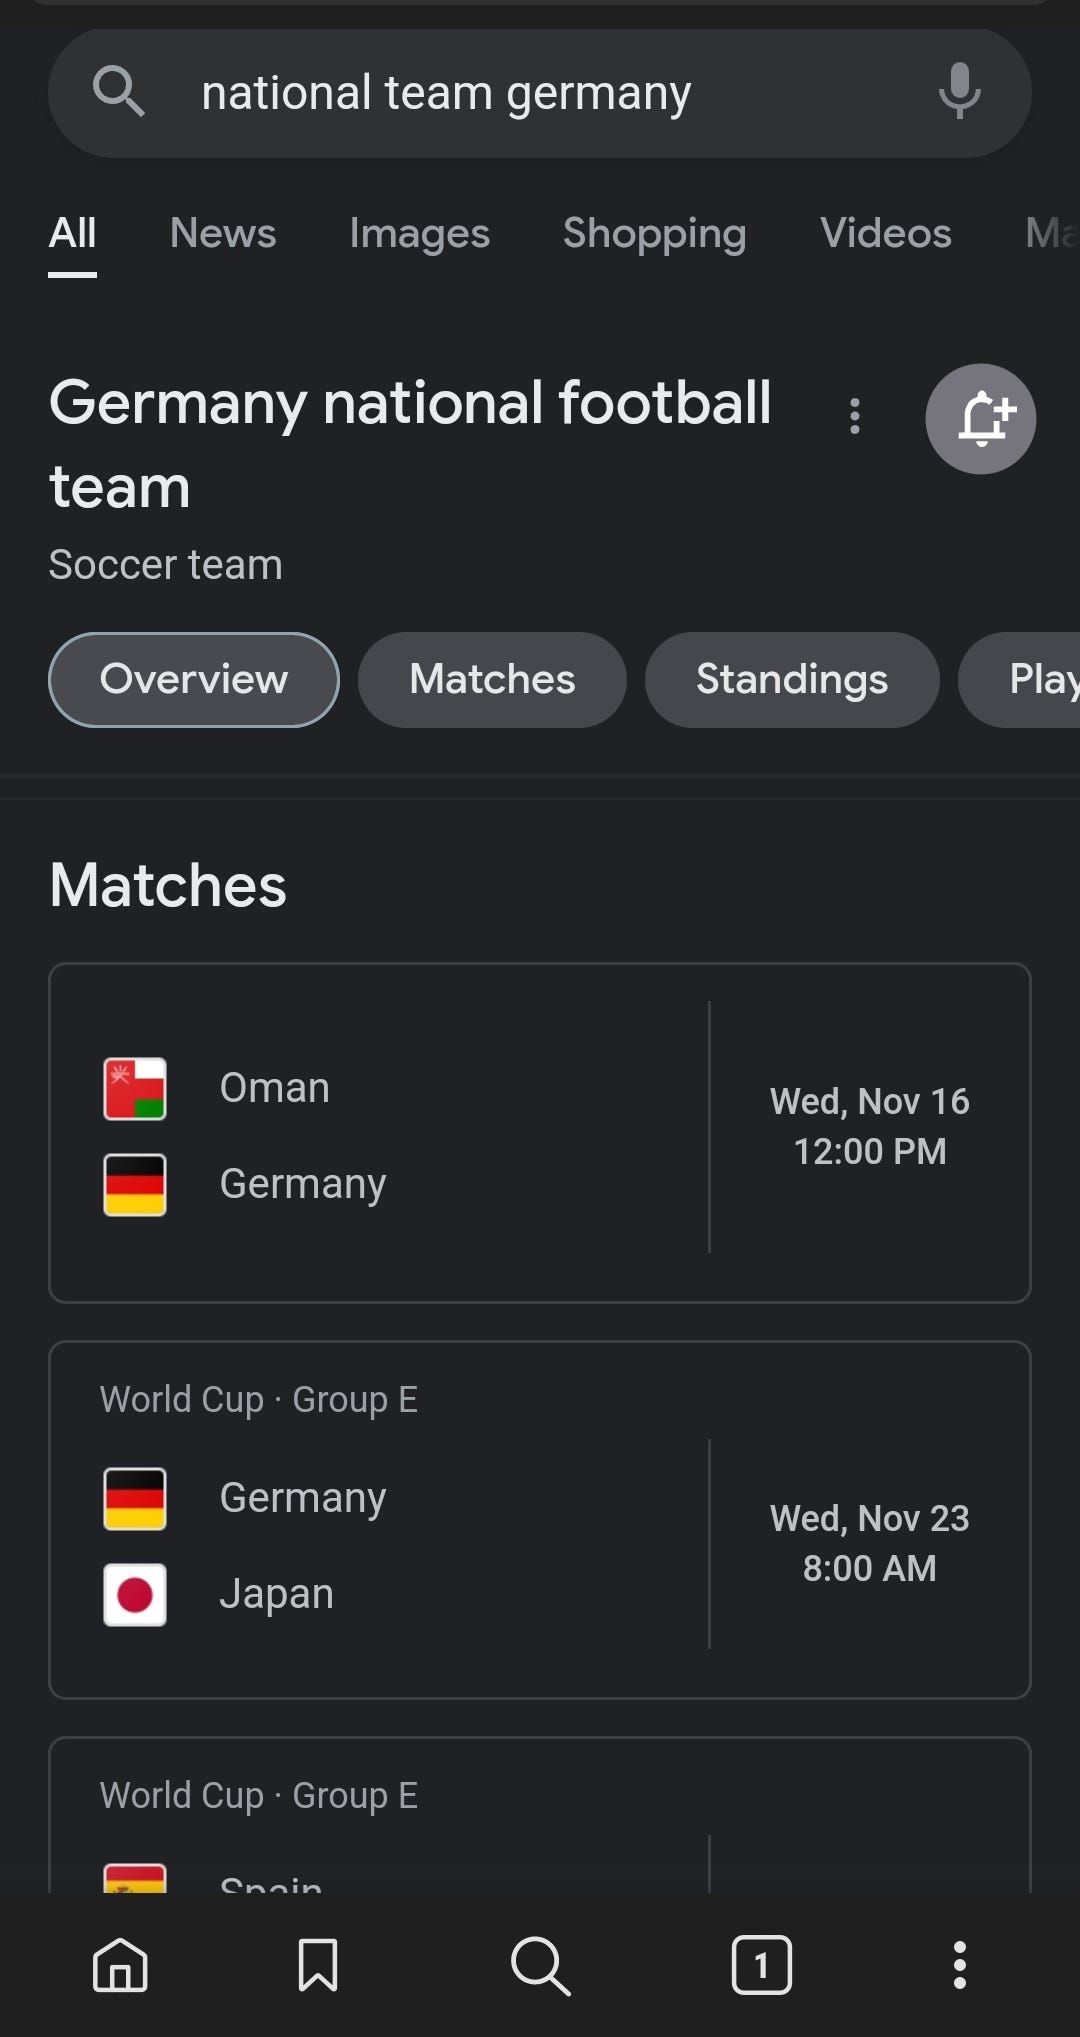 Google's search page for the German national soccer team